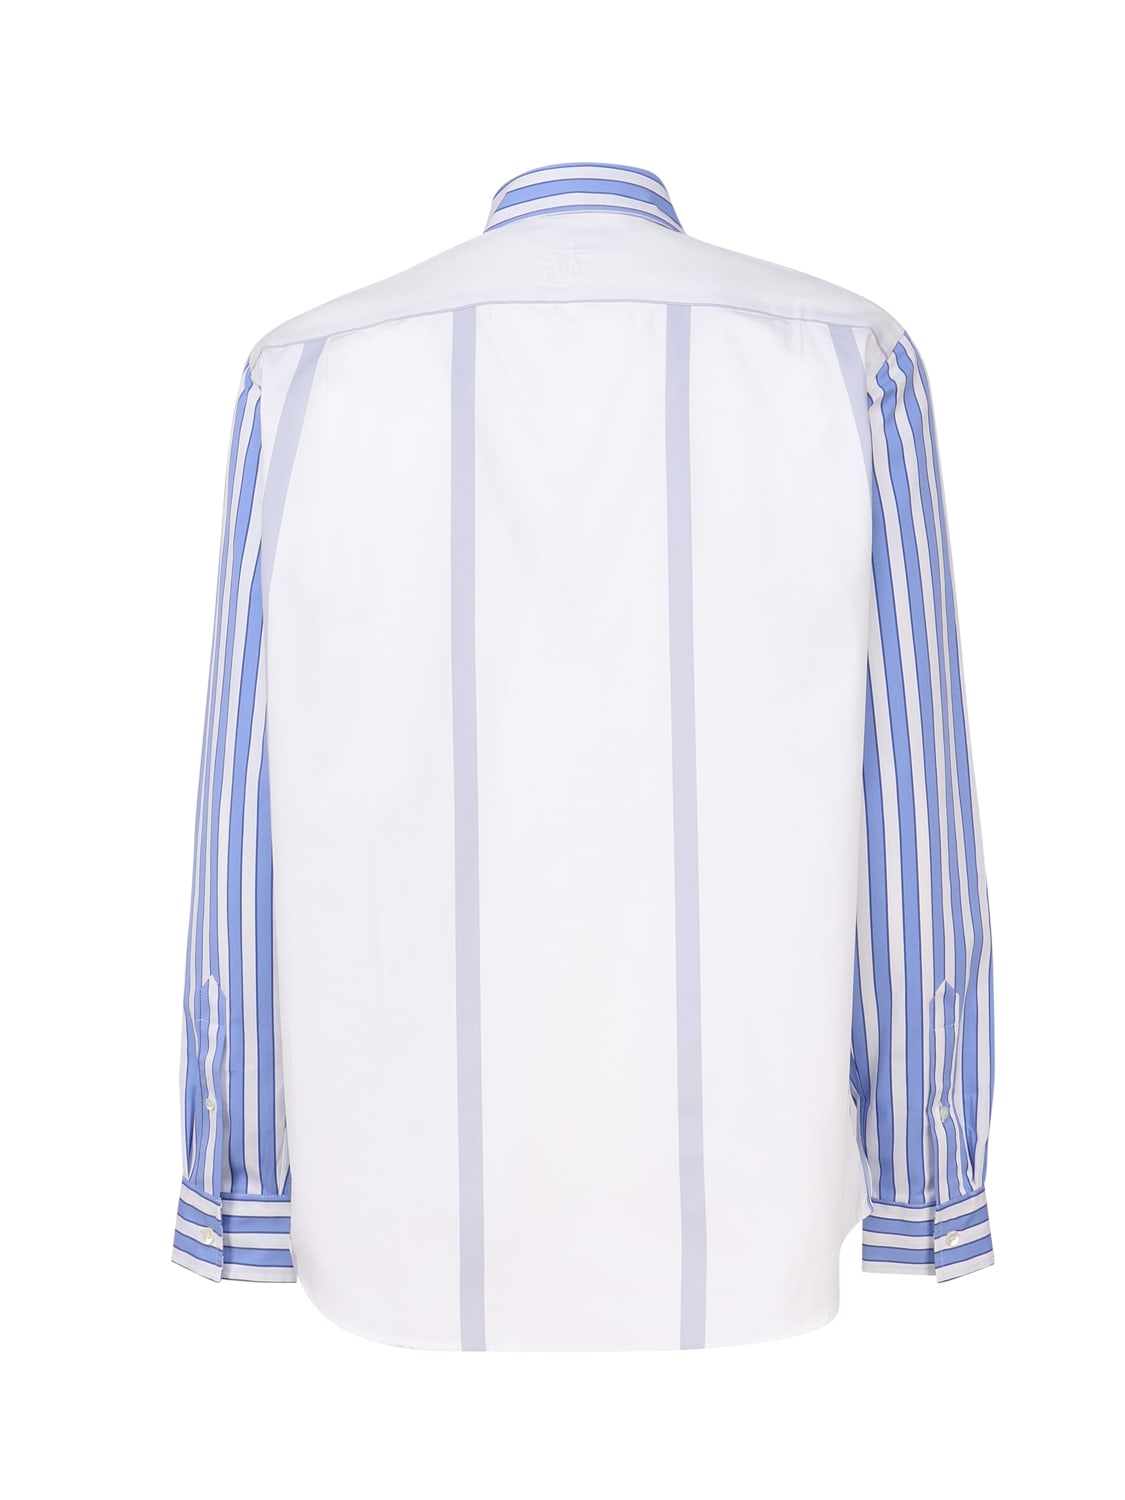 Shop Jw Anderson Striped Shirt With Insert Design In Light Blue/white